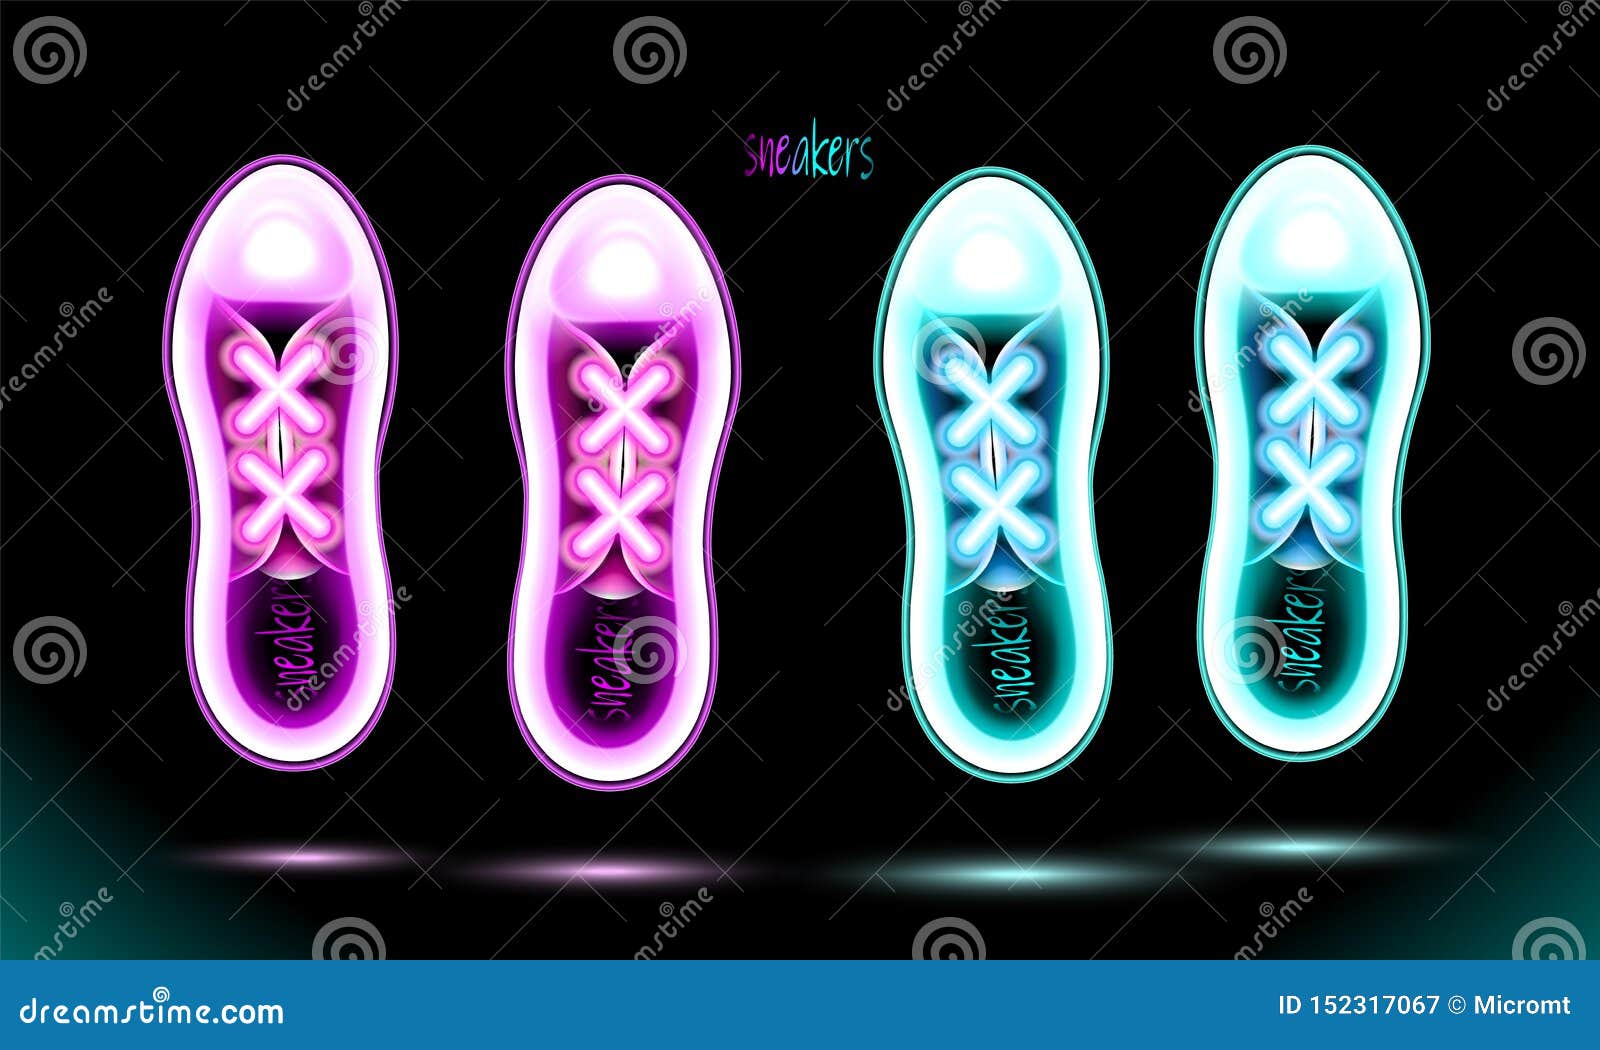 Shoes shop neon sign bright signboard light Vector Image